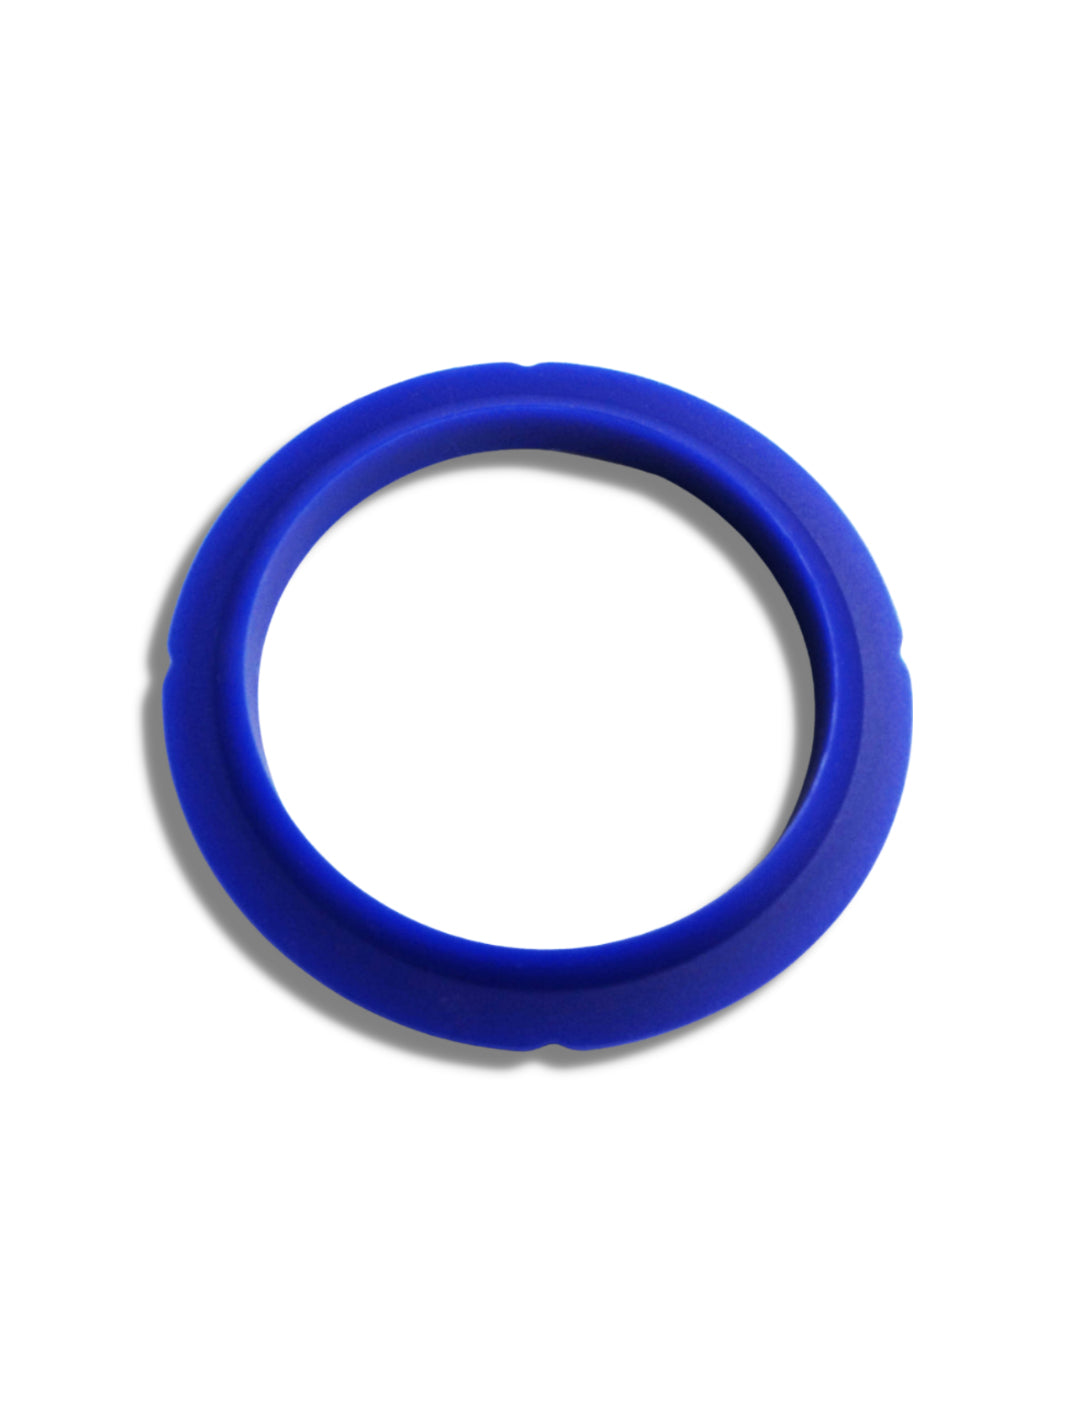 CAFELAT Silicone Group Gasket for La Marzocco